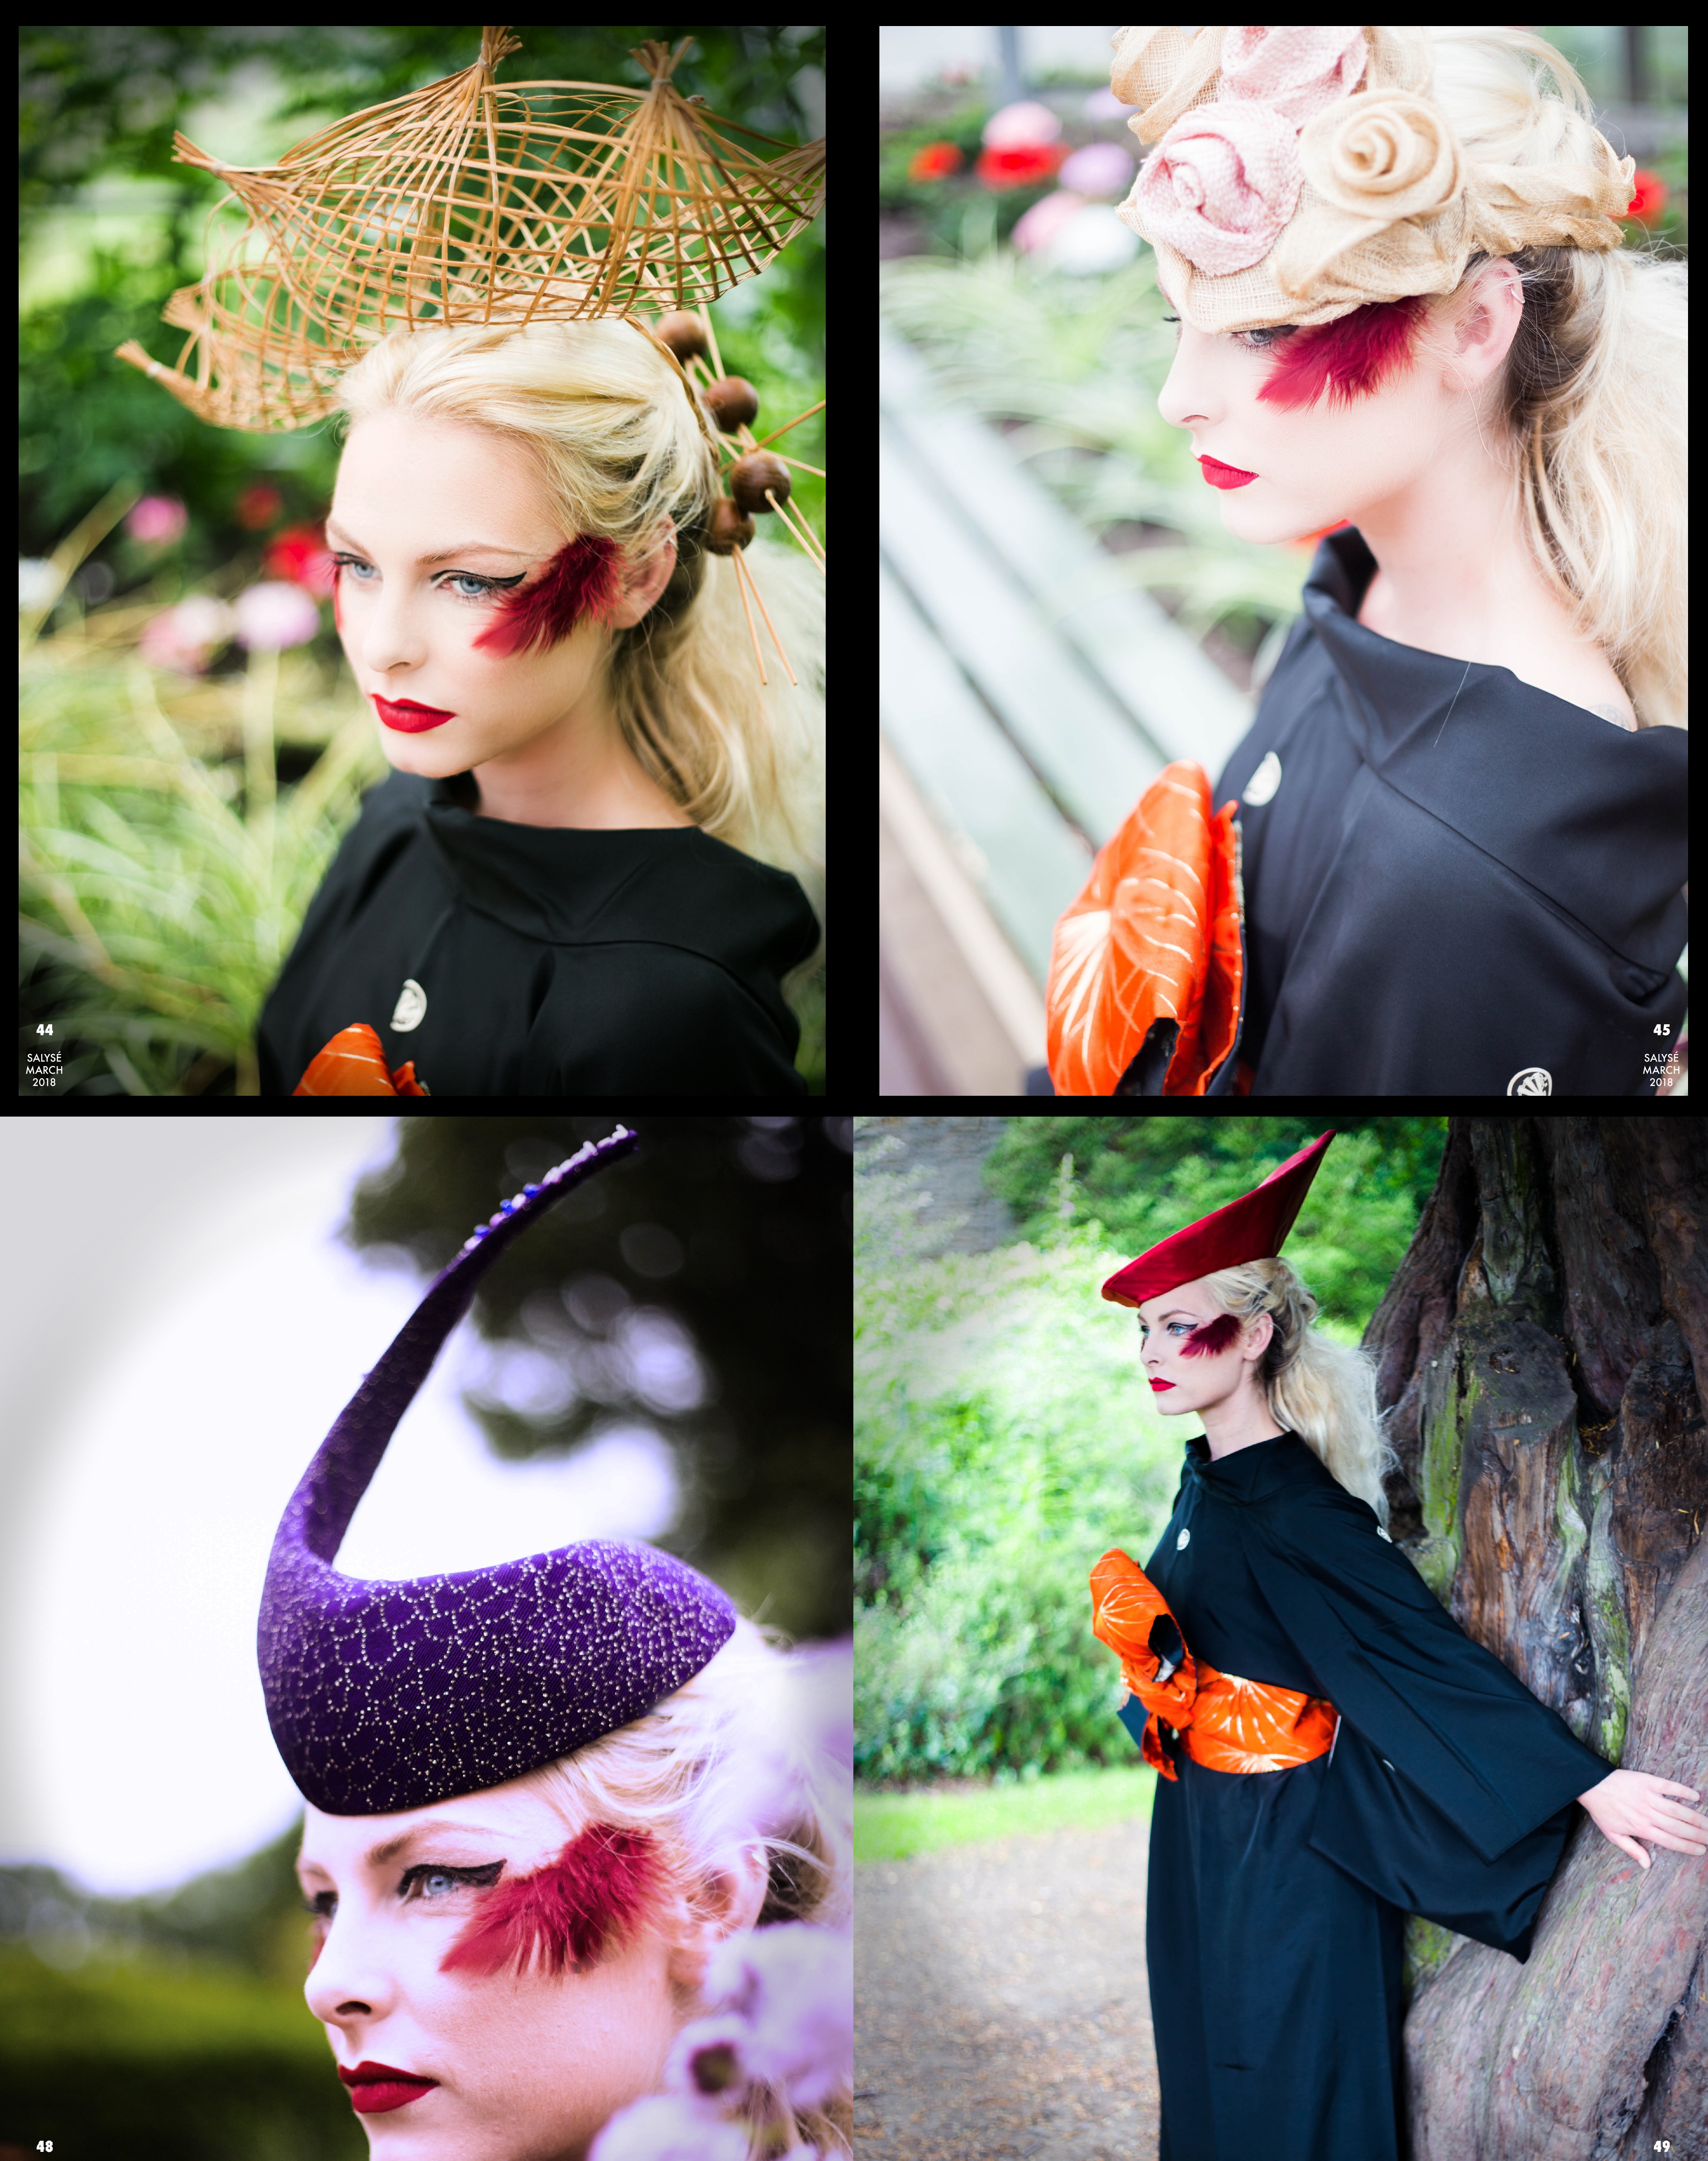 Unique design of Bespoke headpieces and hats for any occasions